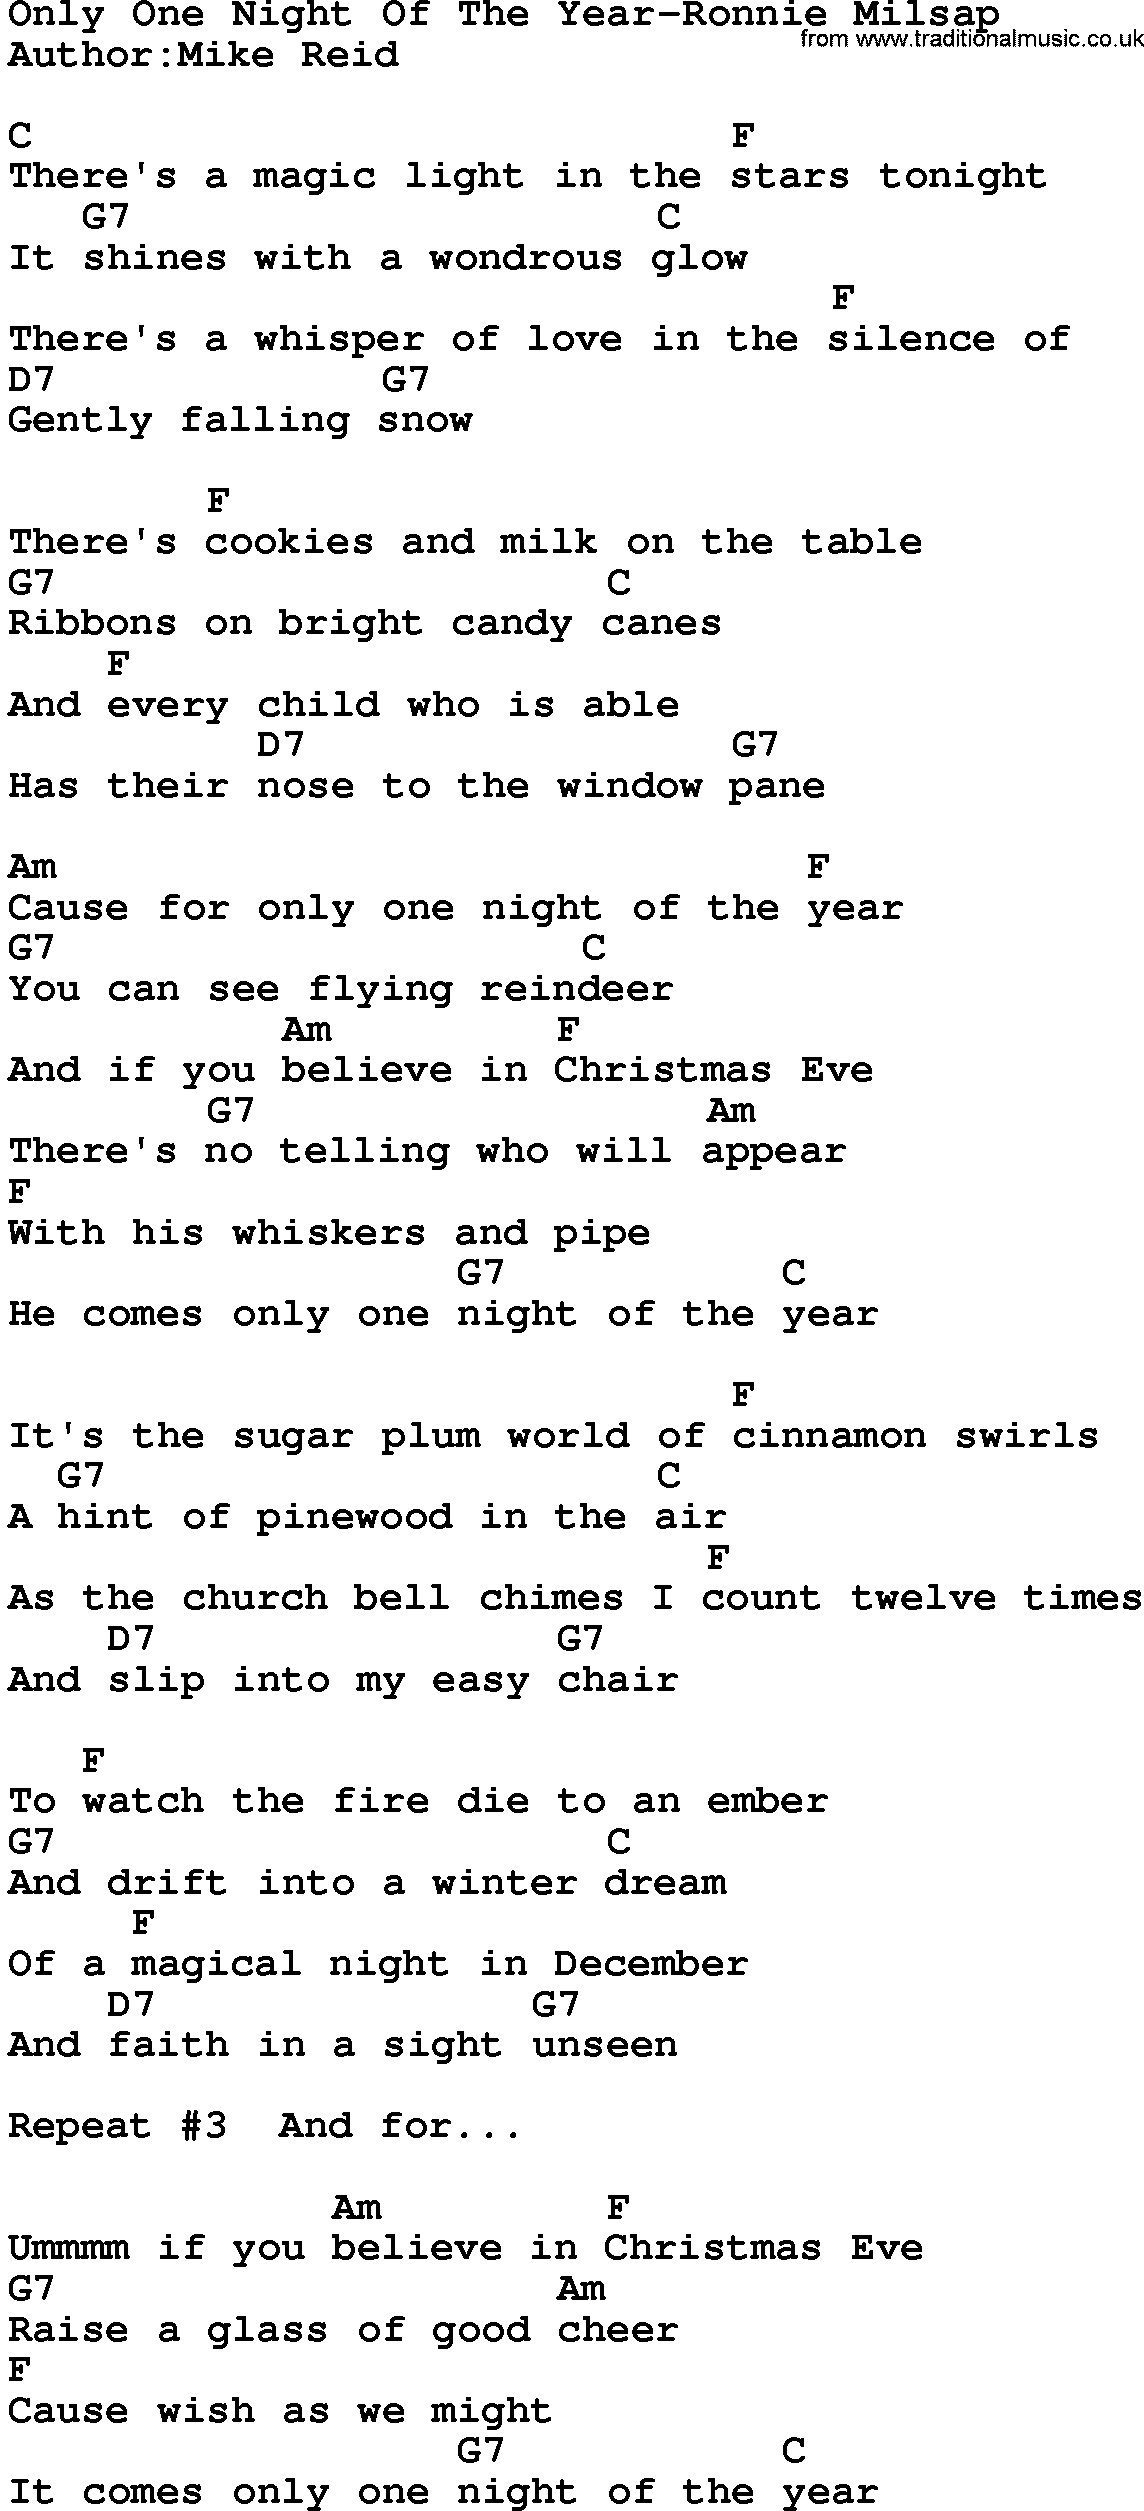 Country music song: Only One Night Of The Year-Ronnie Milsap lyrics and chords